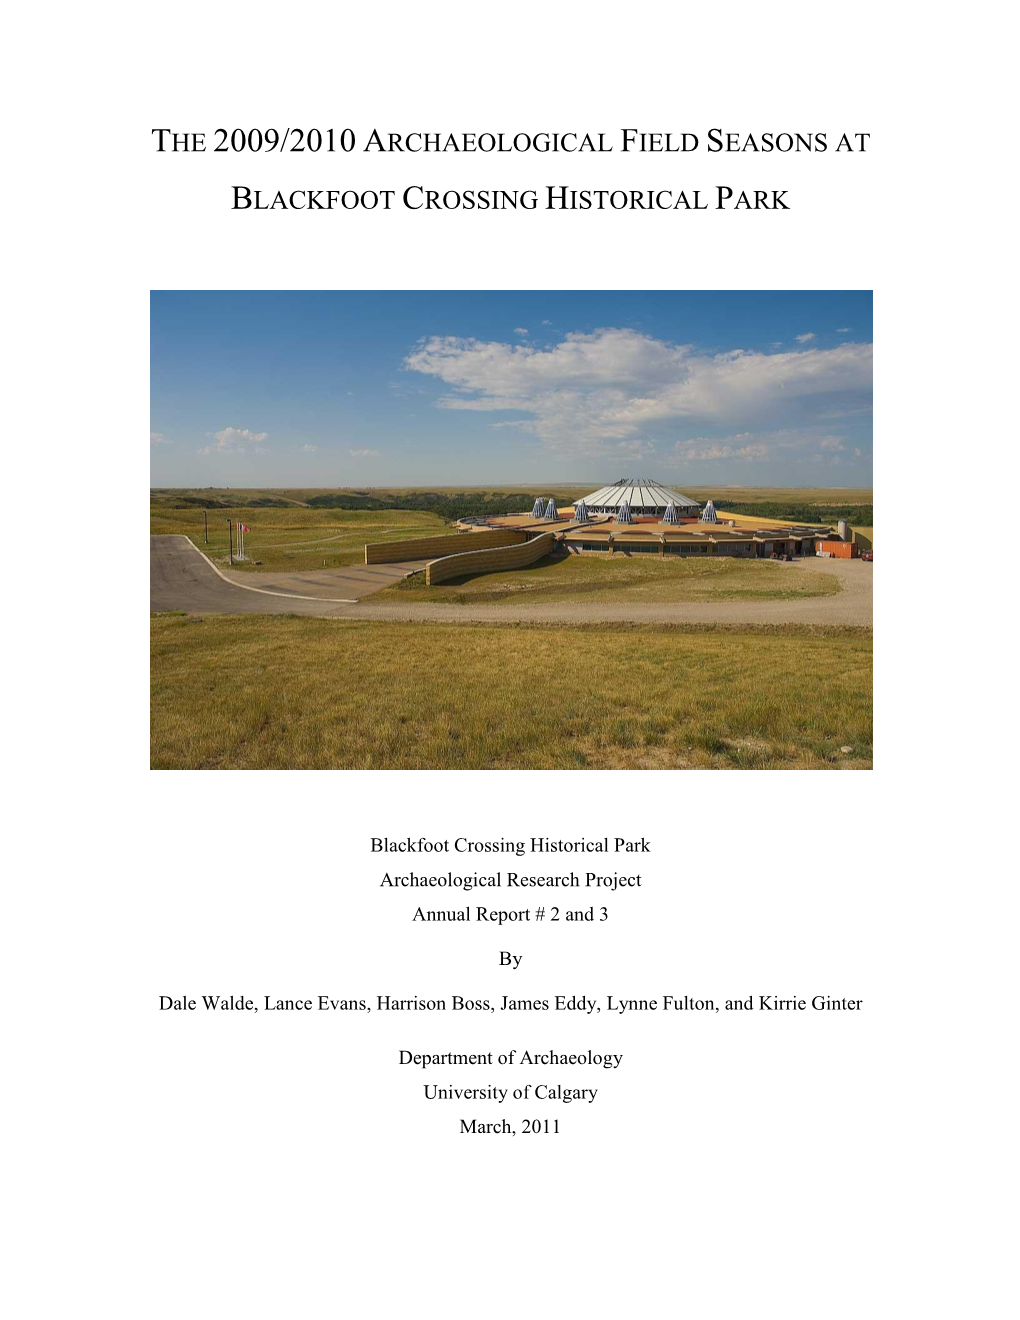 The 2009/2010 Archaeological Field Seasons at Blackfoot